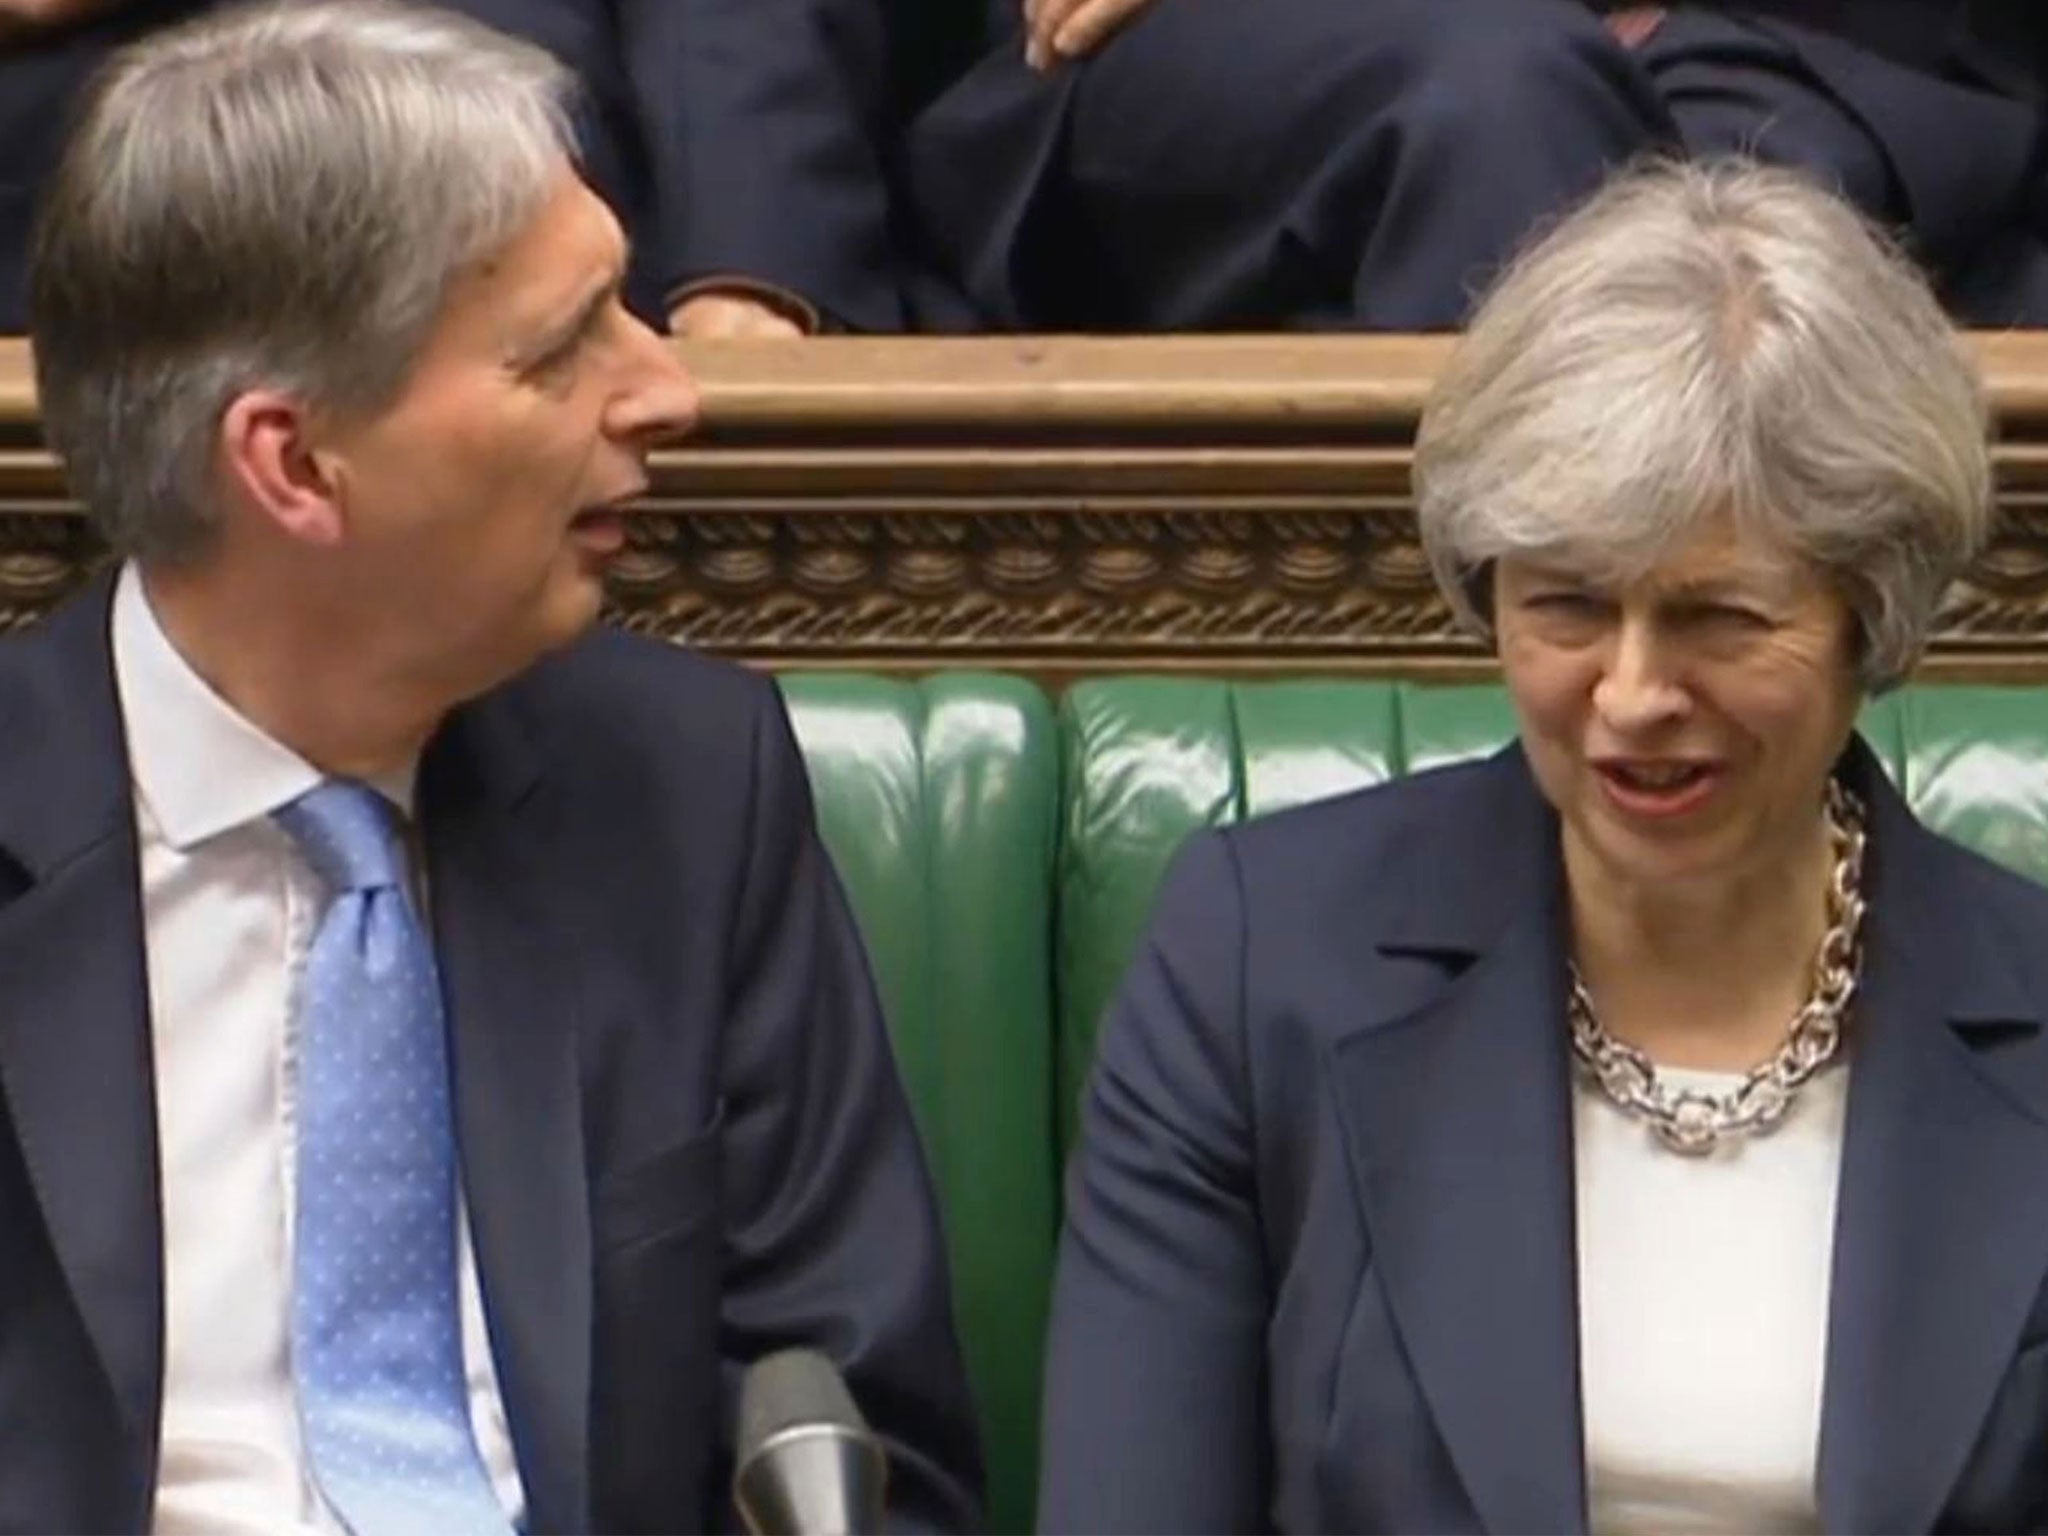 Chancellor Philip Hammond and Prime Minister Theresa May listen to Shadow Chancellor John McDonnell speaking in the House of Commons